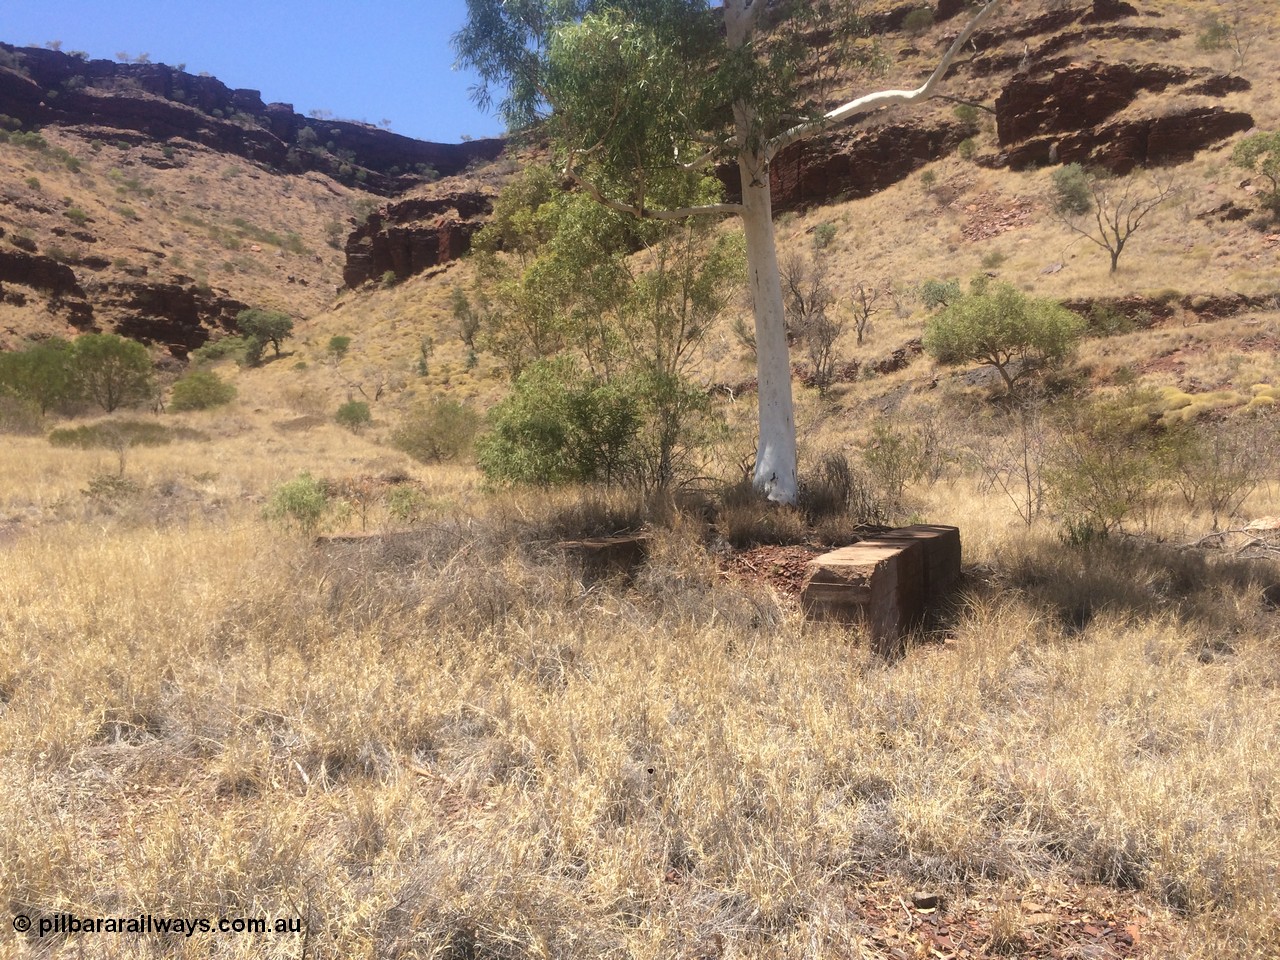 160101 2299
Wittenoom Gorge, location of former power station, shows old concrete foundations with tress growing through them, looking south west, geodata: [url=https://goo.gl/maps/X3CYaqqaZ832] -22.3222056 118.3328944 [/url], iPhone 5S image.
